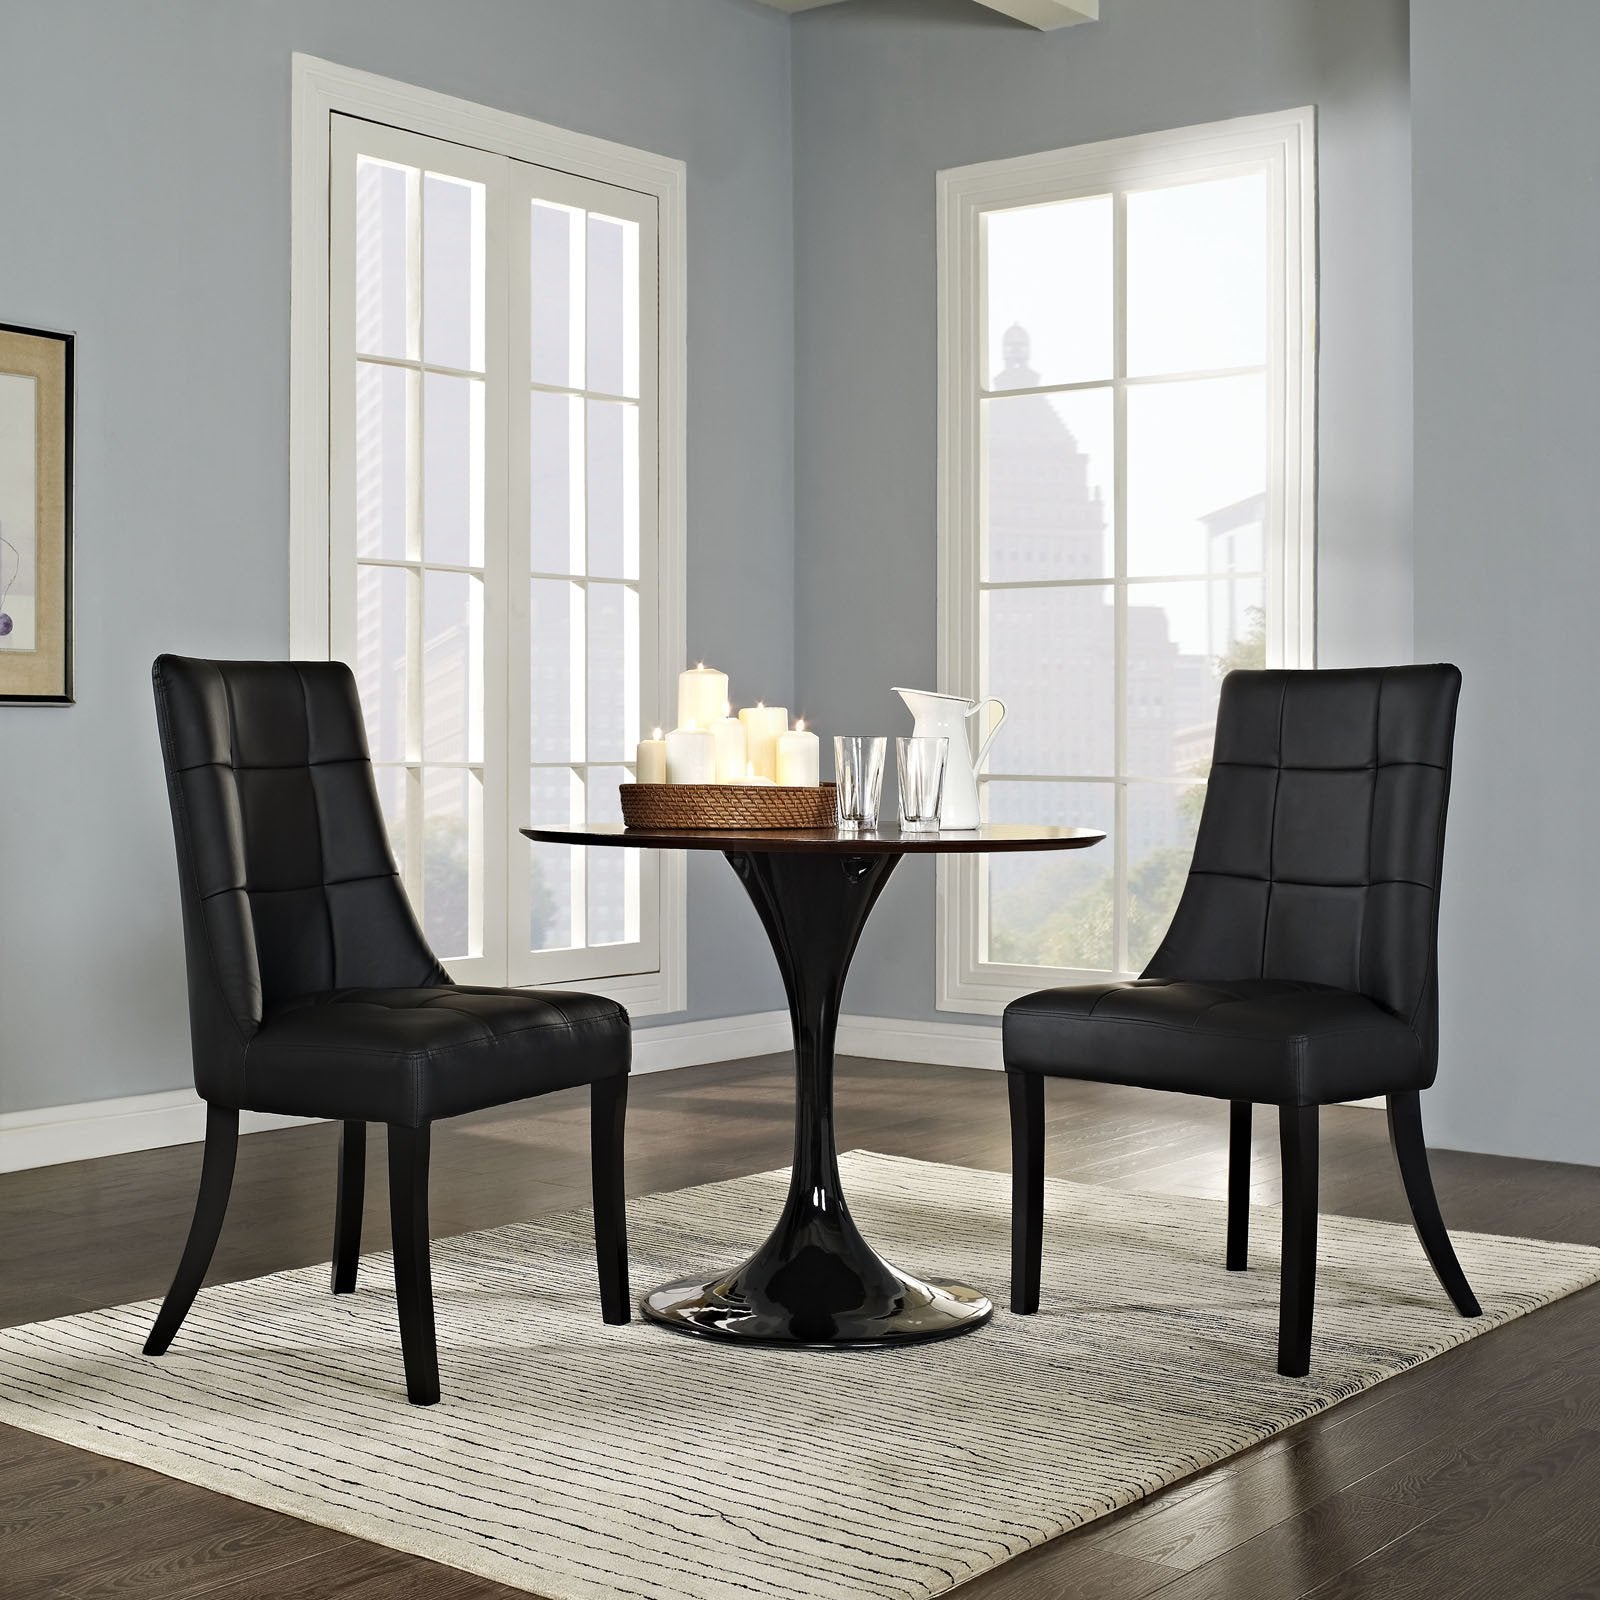 Majesty Vinyl Dining Chair Set of 2 - living-essentials